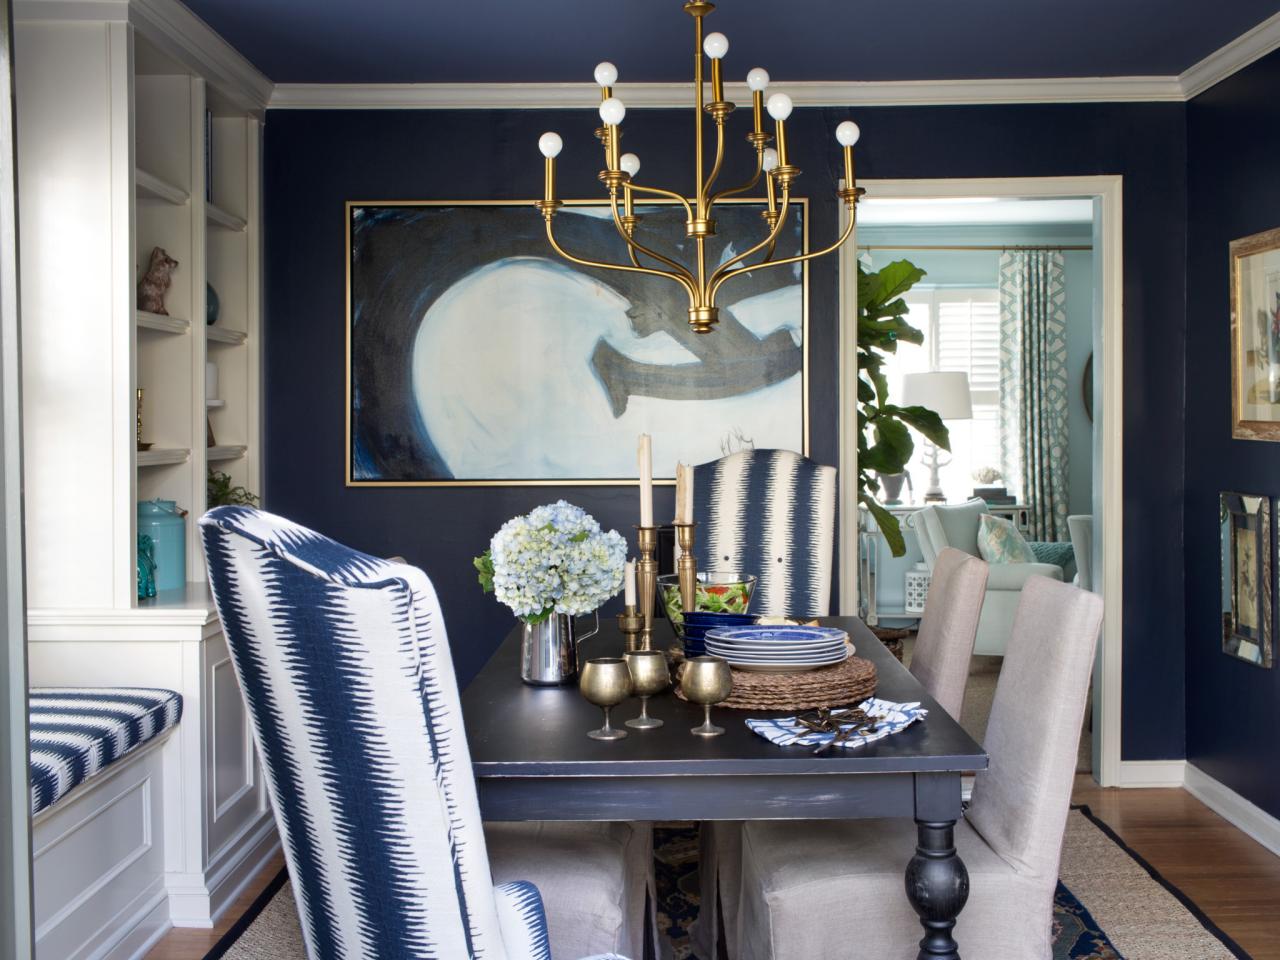 15 Ways to Dress Up Your Dining Room Walls | HGTV's Decorating & Design